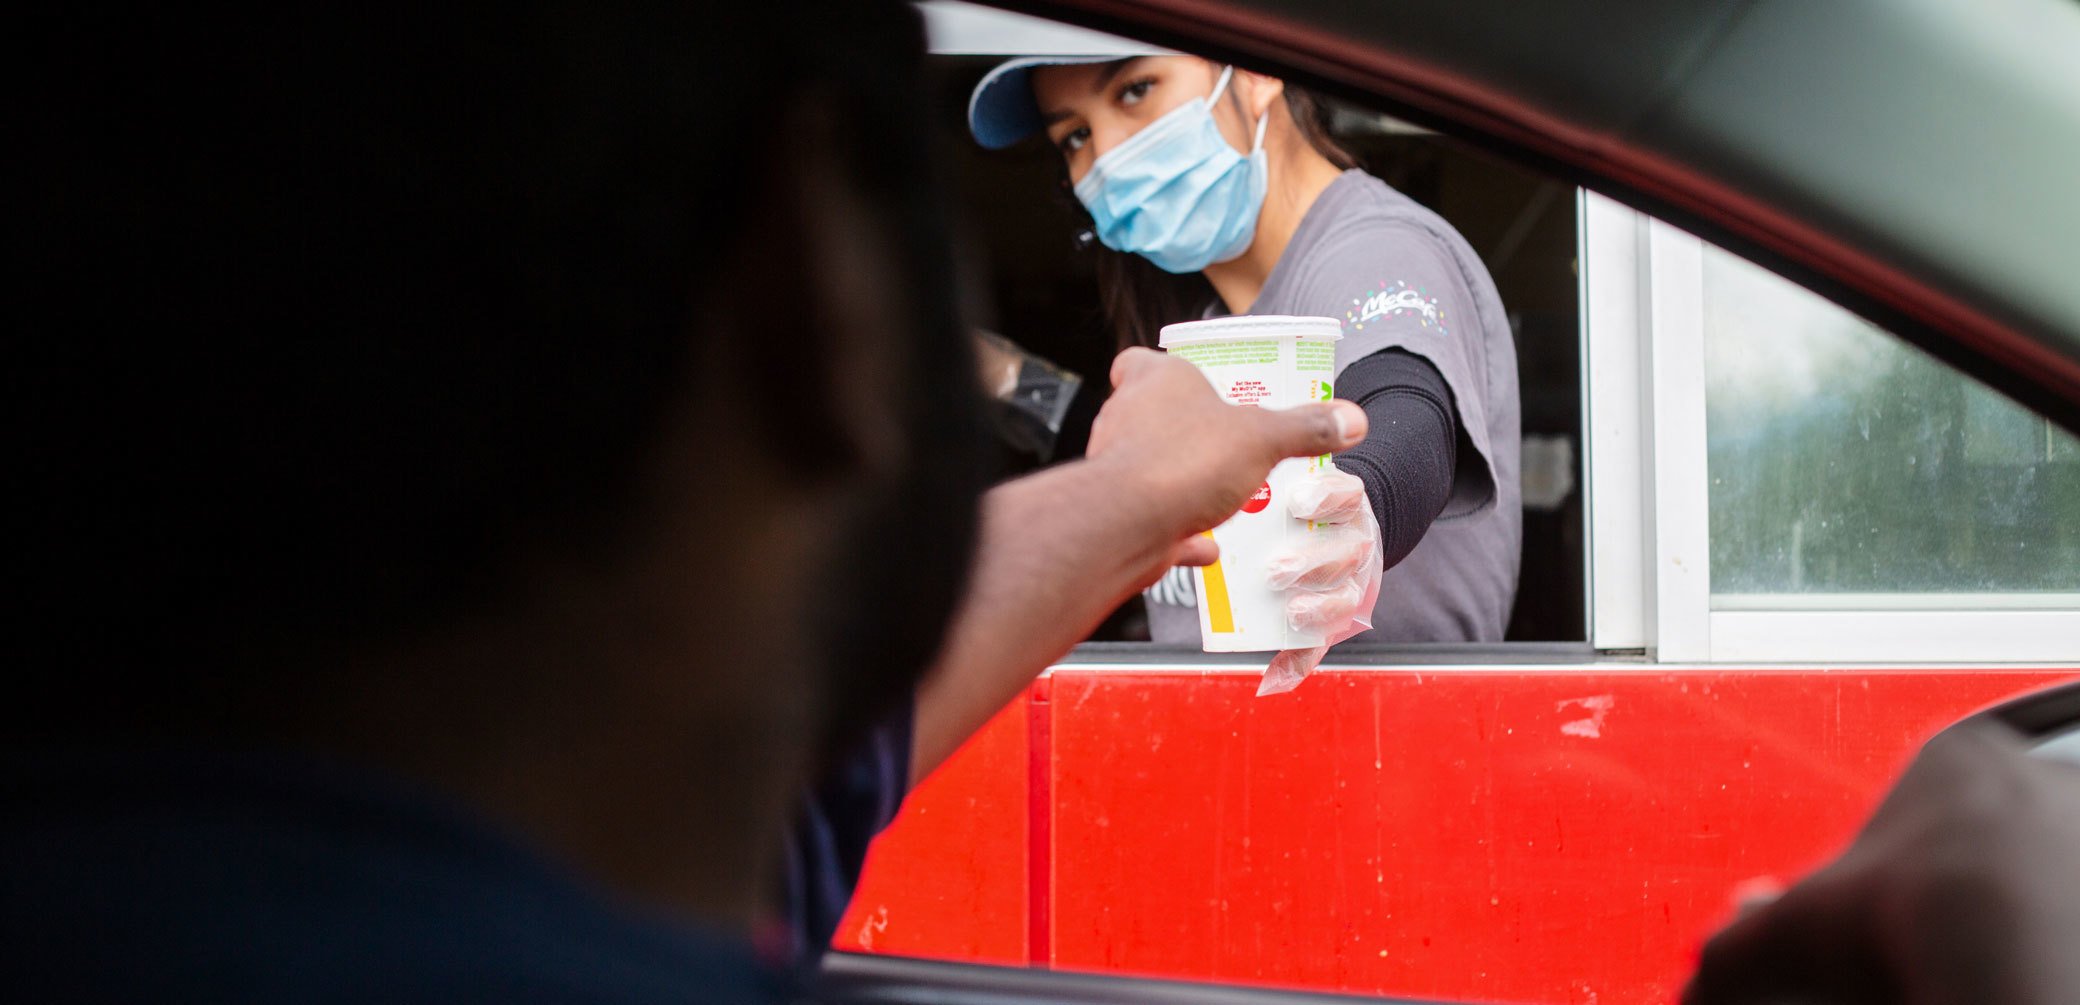 Drive-thru worker with a mask on handing a drink to a customer.